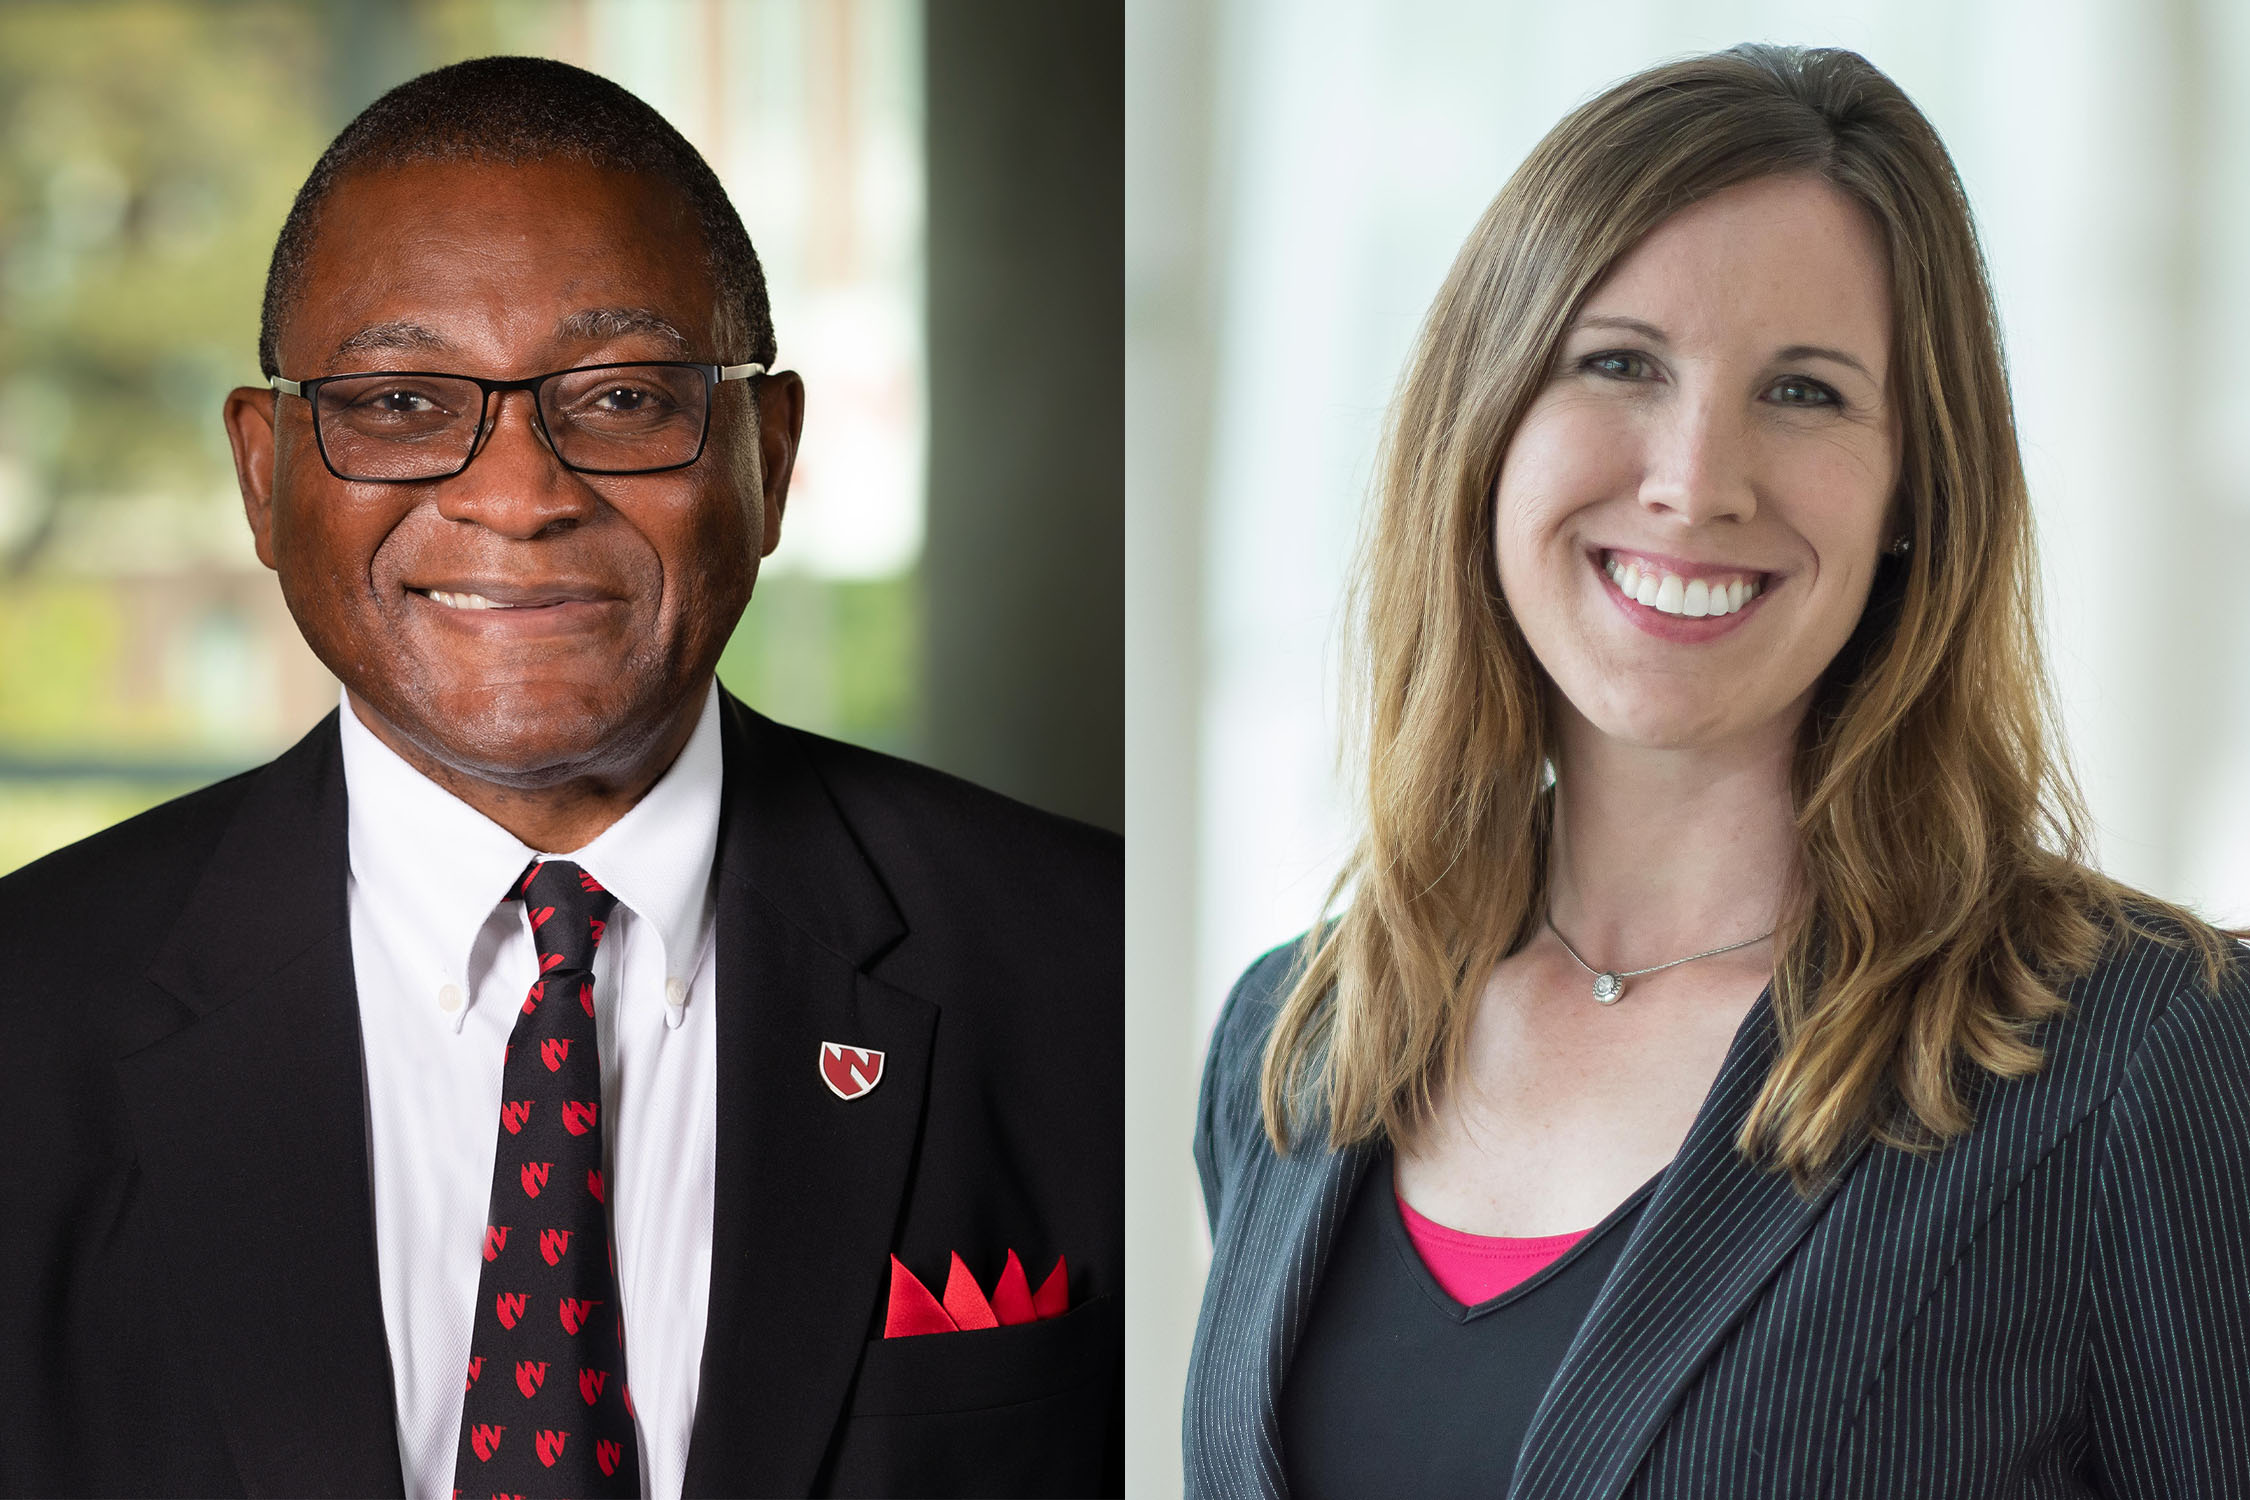 Dele Davies&comma; MD&comma; senior vice chancellor for academic affairs&comma; and Heidi Keeler&comma; PhD&comma; assistant vice chancellor of the UNMC Office of Community Engagement